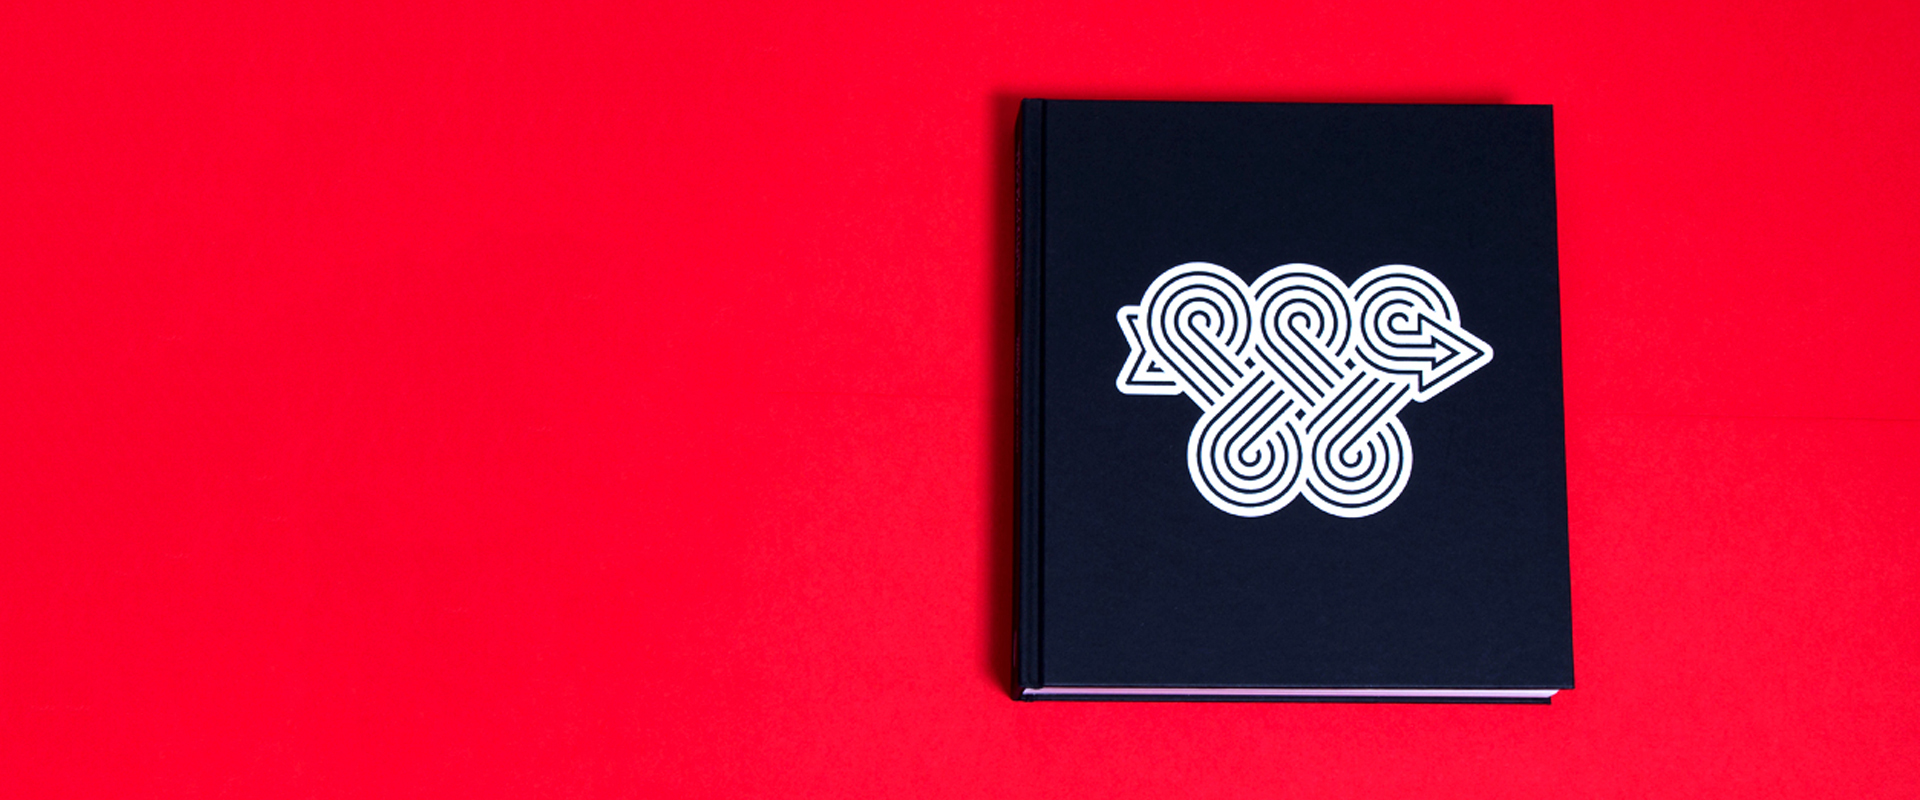 Thumbnail for: Shillington Book Club: Lance Wyman: The Monograph by Adrian Shaughnessy & Tony Brook